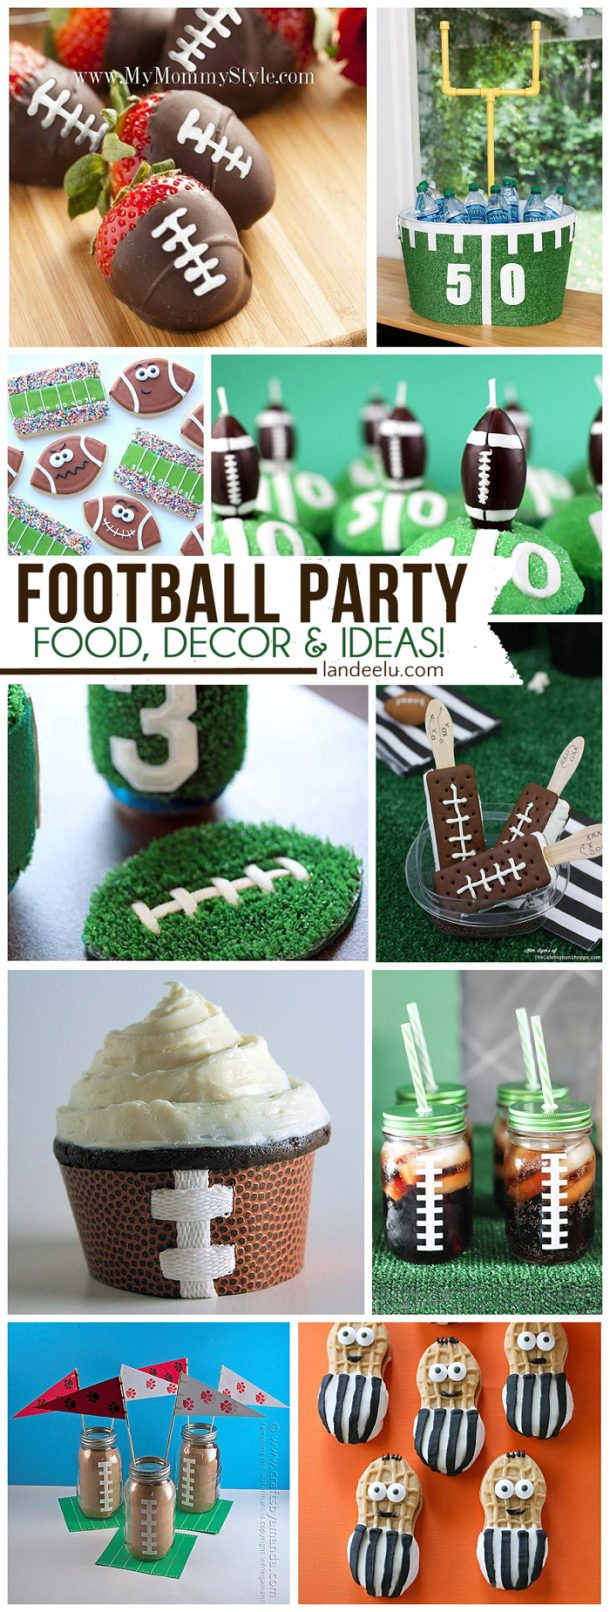 DIY Football Party Decorations
 DIY Football Party Ideas Perfect for Team Parties